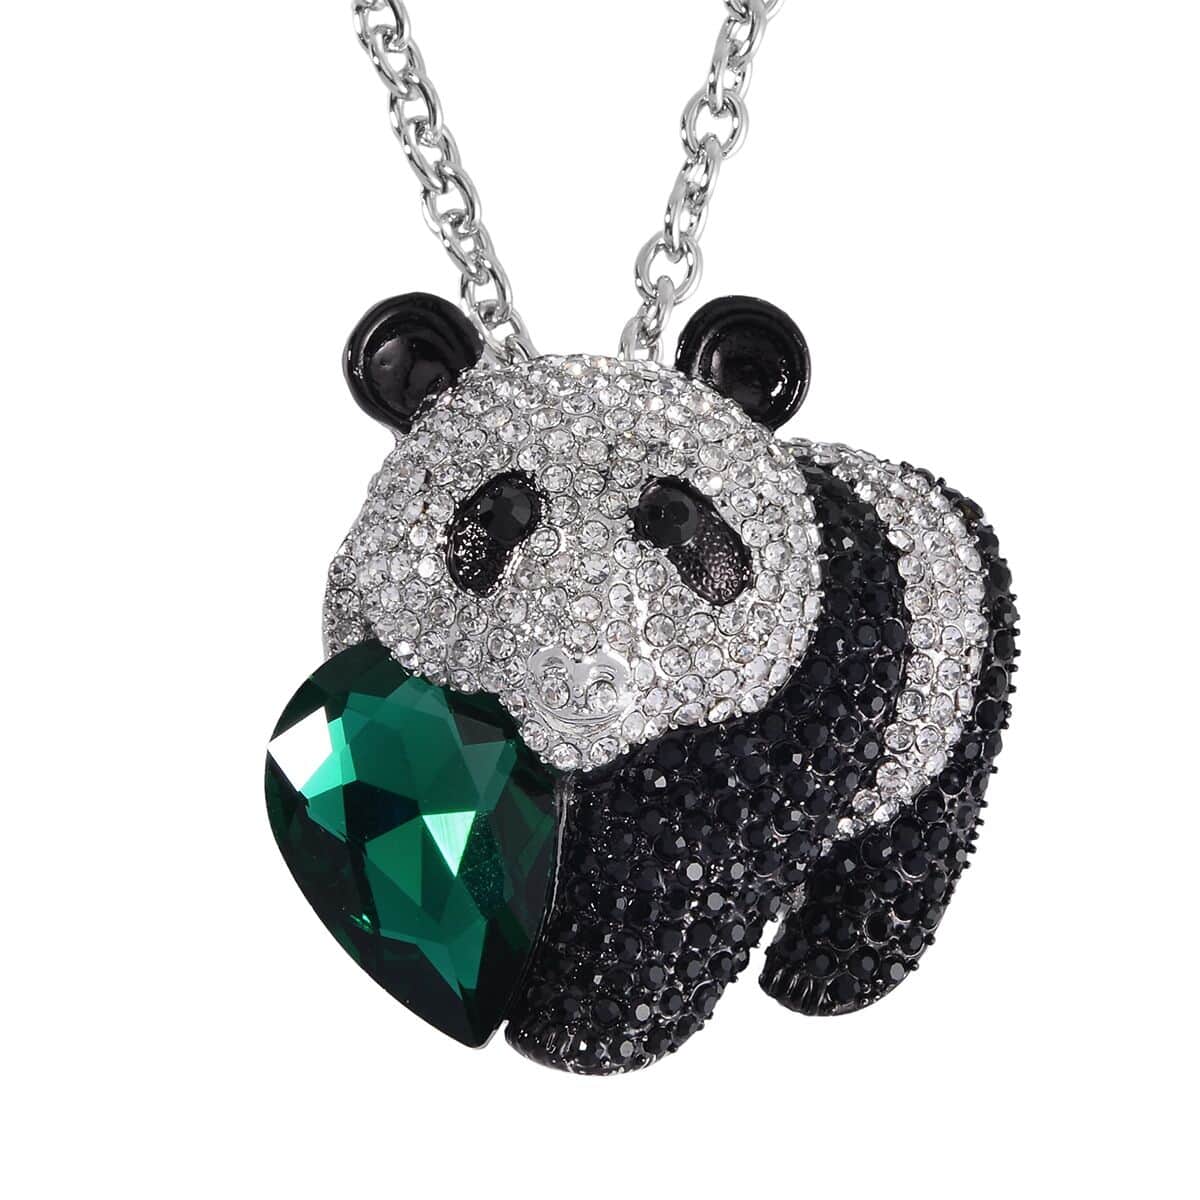 Green Glass, Black and White Austrian Crystal Panda Brooch Or Pendant with Necklace 24-26 Inches in Silvertone image number 0